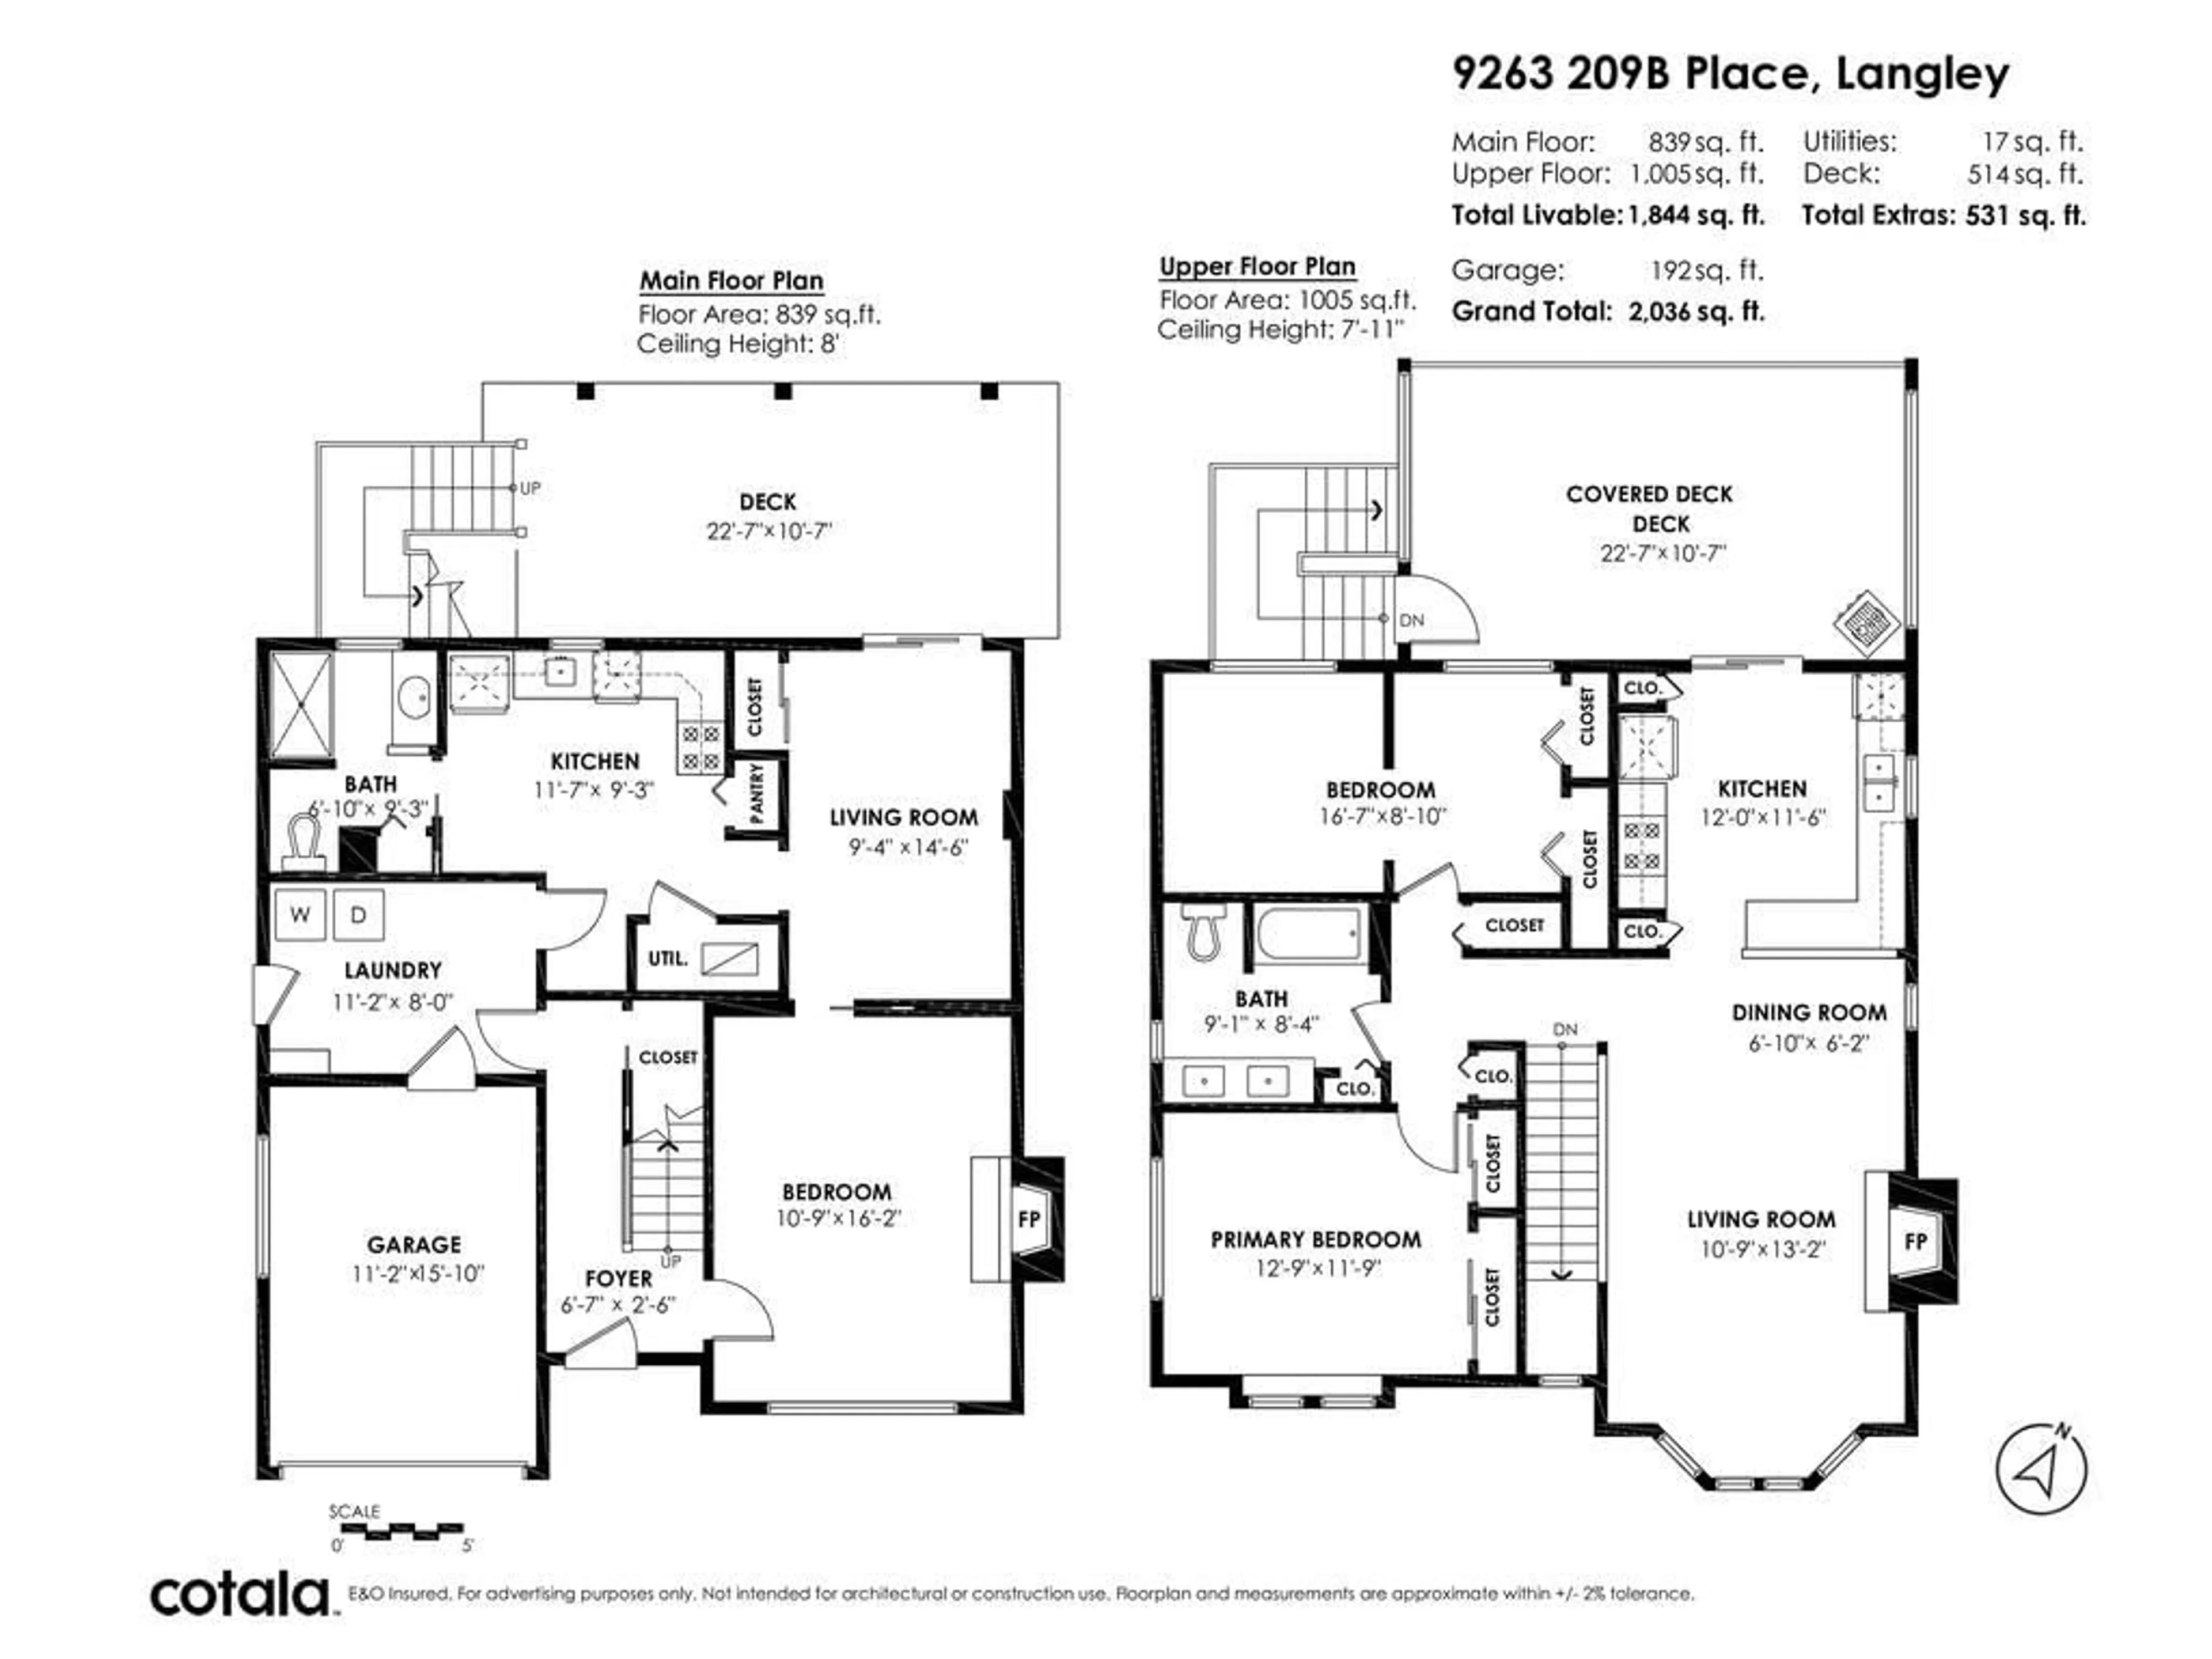 Floor plan for 9263 209B PLACE, Langley British Columbia V1M1T1